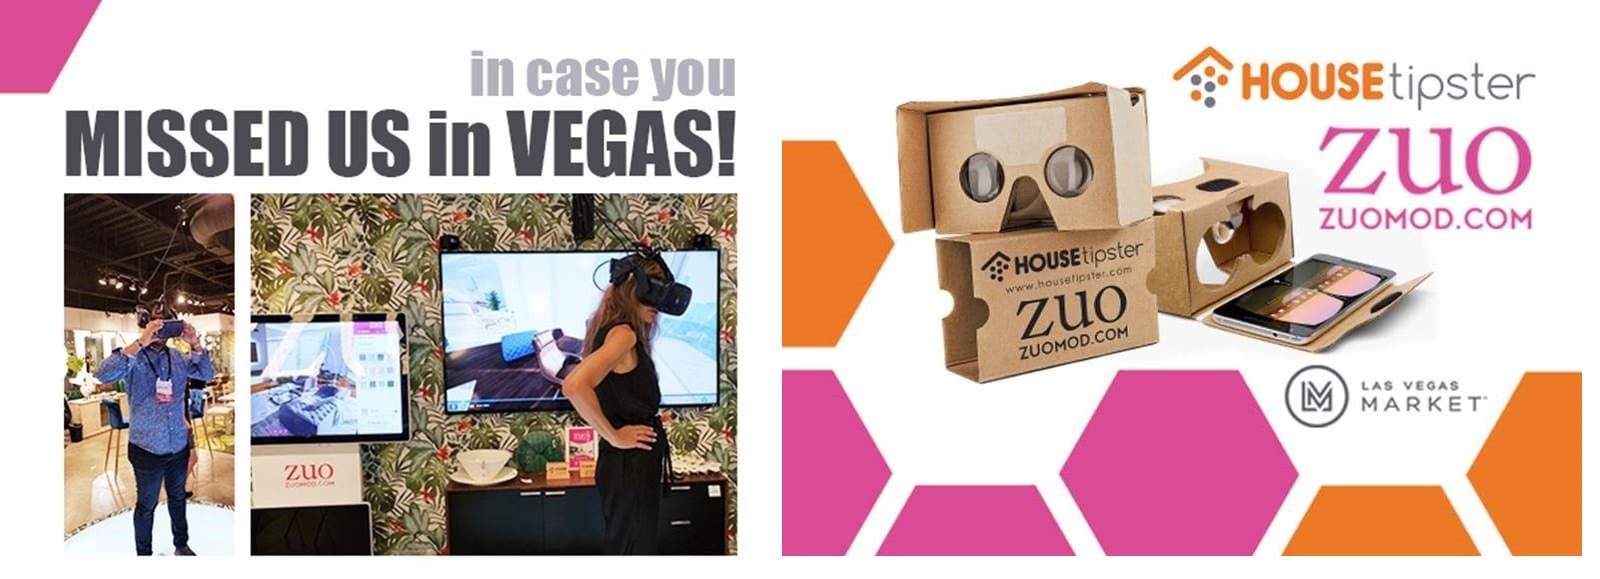 In case you missed us at Vegas: Watch our live VR experience